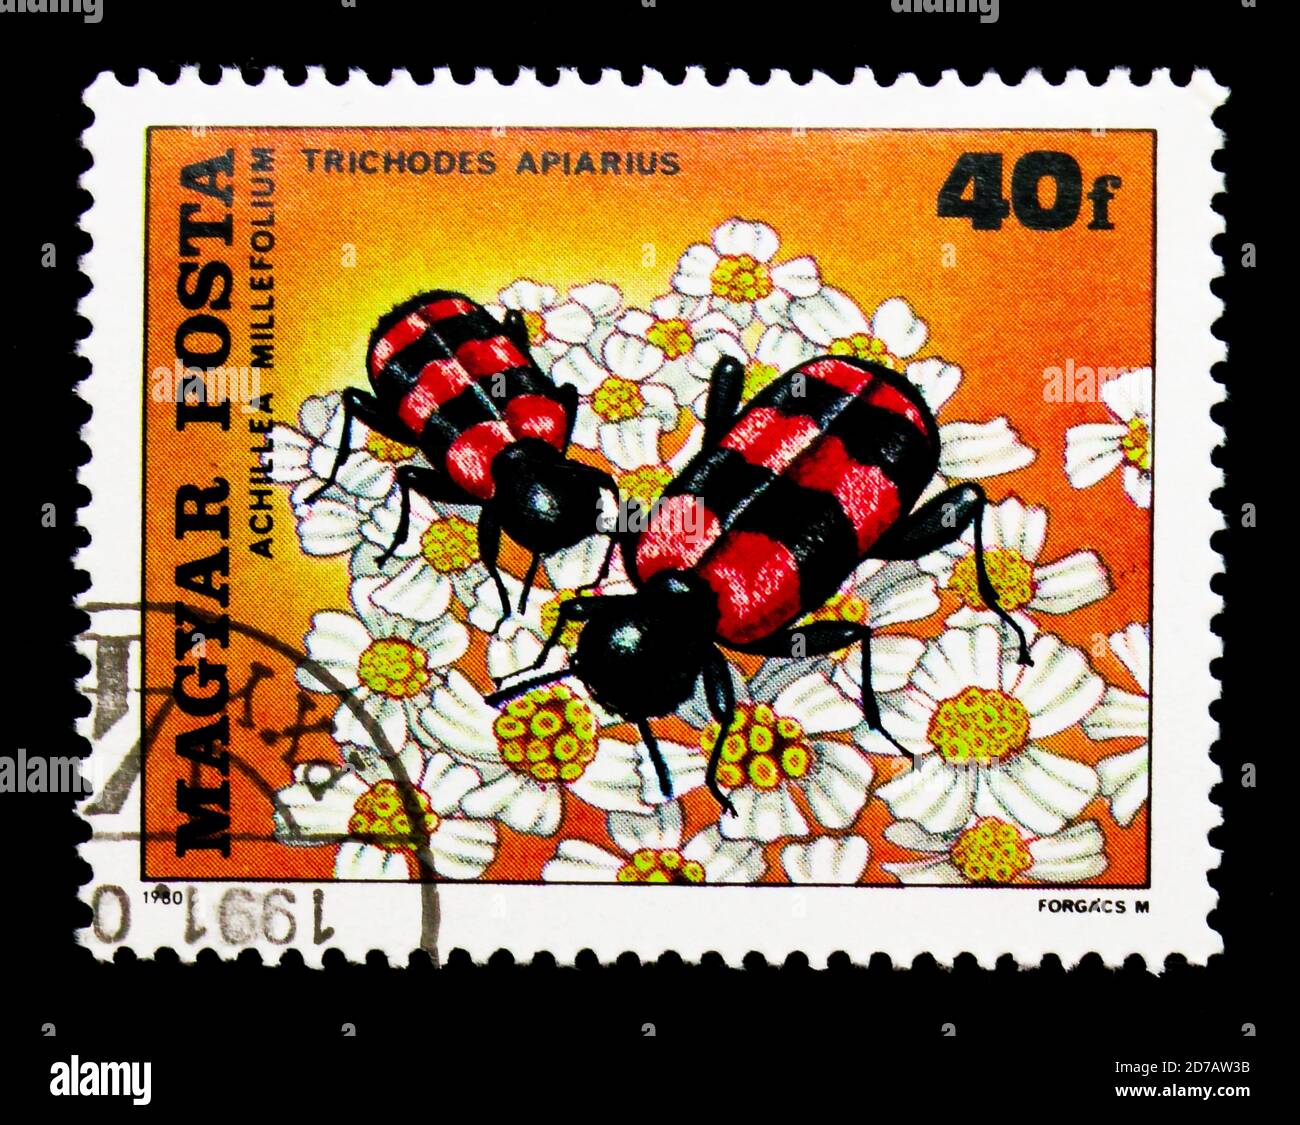 MOSCOW, RUSSIA - NOVEMBER 26, 2017: A stamp printed in Hungary shows European Beewolf (Trichodes apiarius) and Common Yarrow (Achillea Millefolium), I Stock Photo